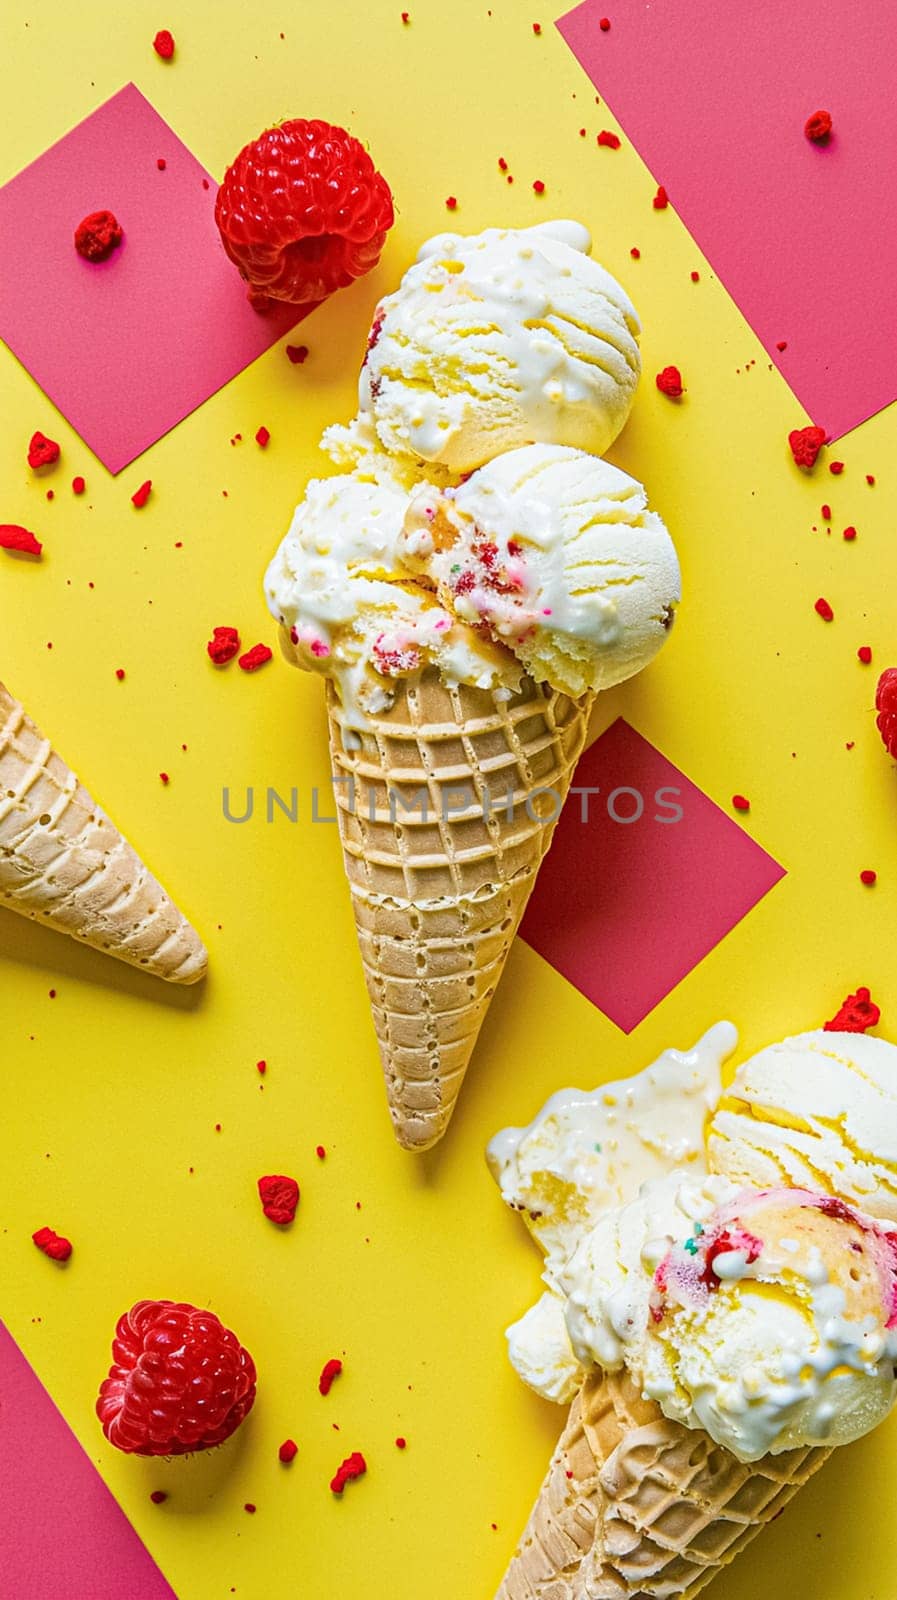 Scoops of ice cream in a waffle cones on colorful background by Olayola